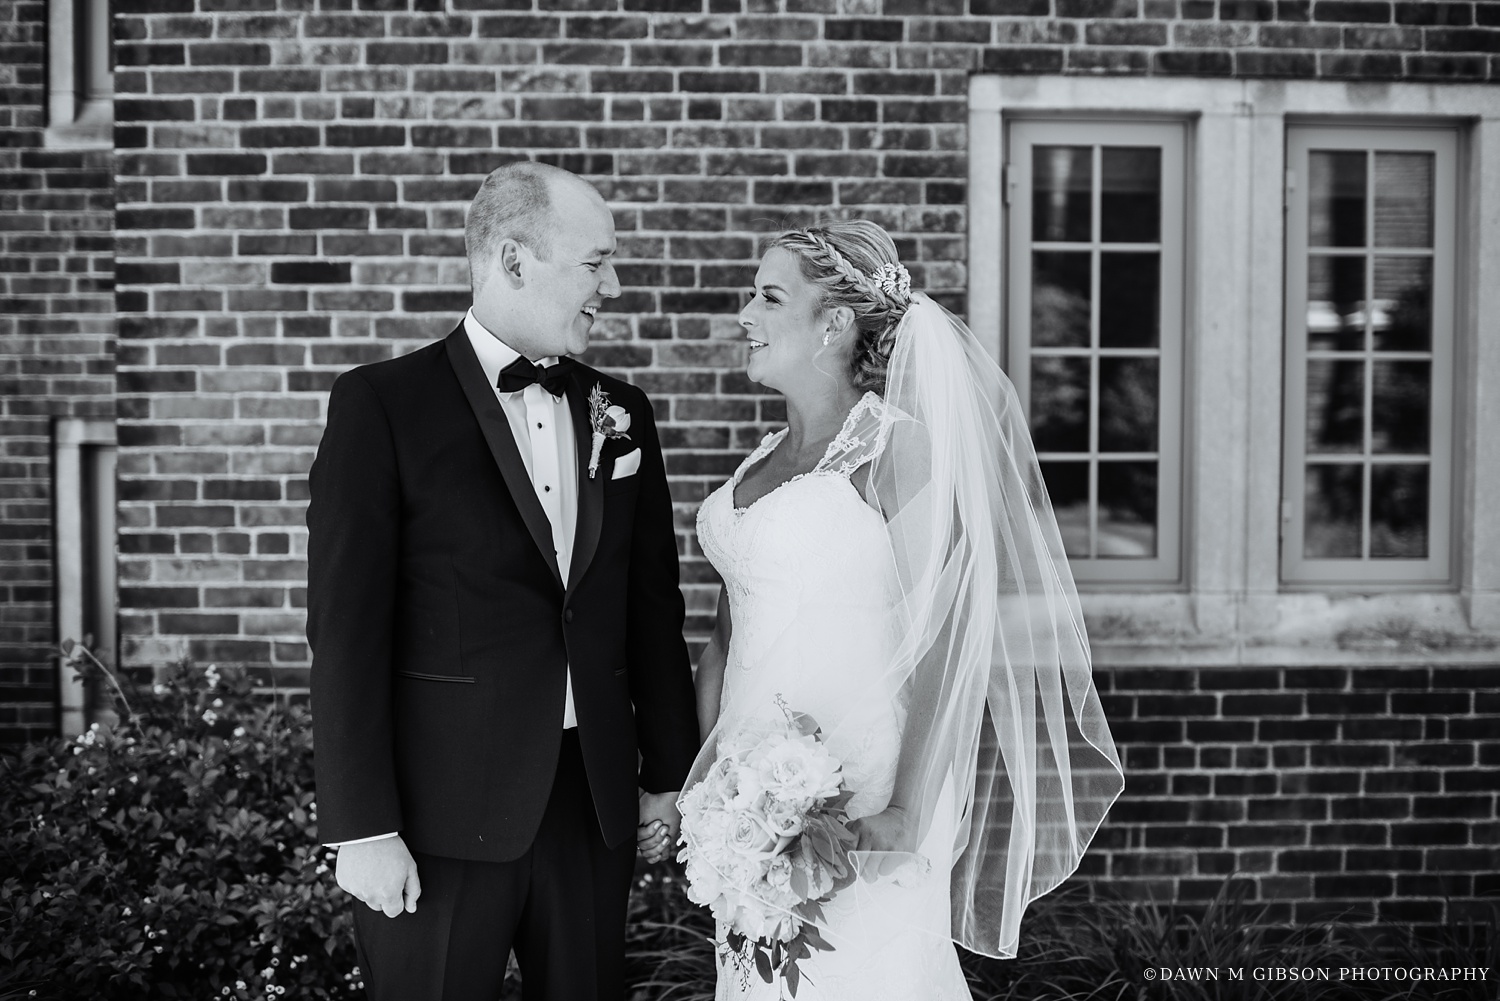 buffalo_wny_rochester_wedding_photographer_dawnmgibsonphotography_strathallan_colgate_rochester_divinity_rochester_wedding_venues_0016.jpg